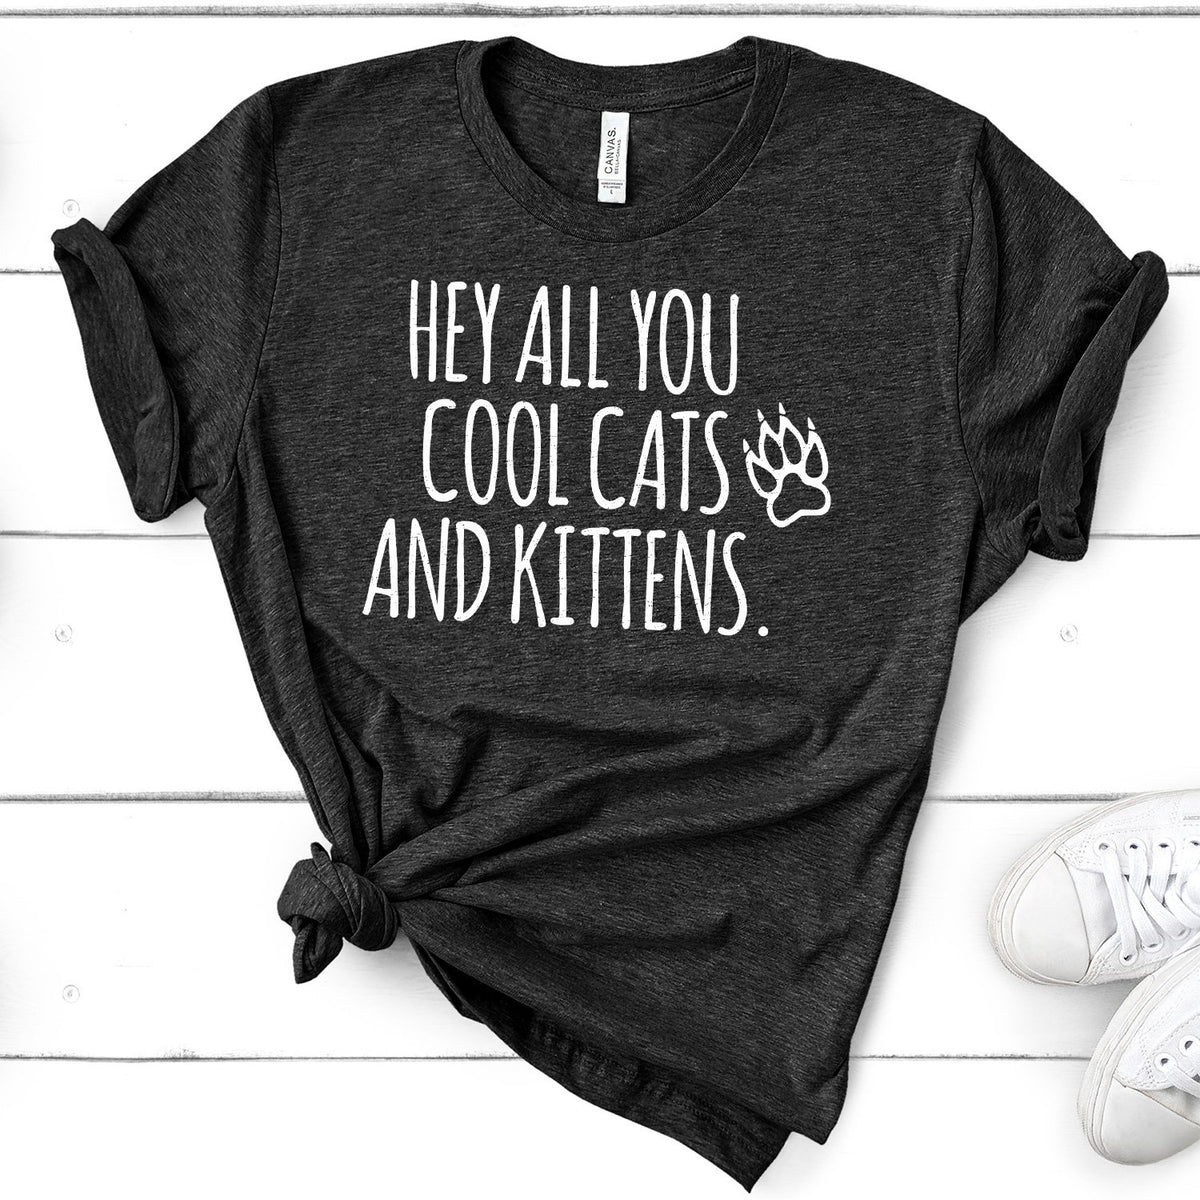 Hey All You Cool Cats and Kittens - Short Sleeve Tee Shirt